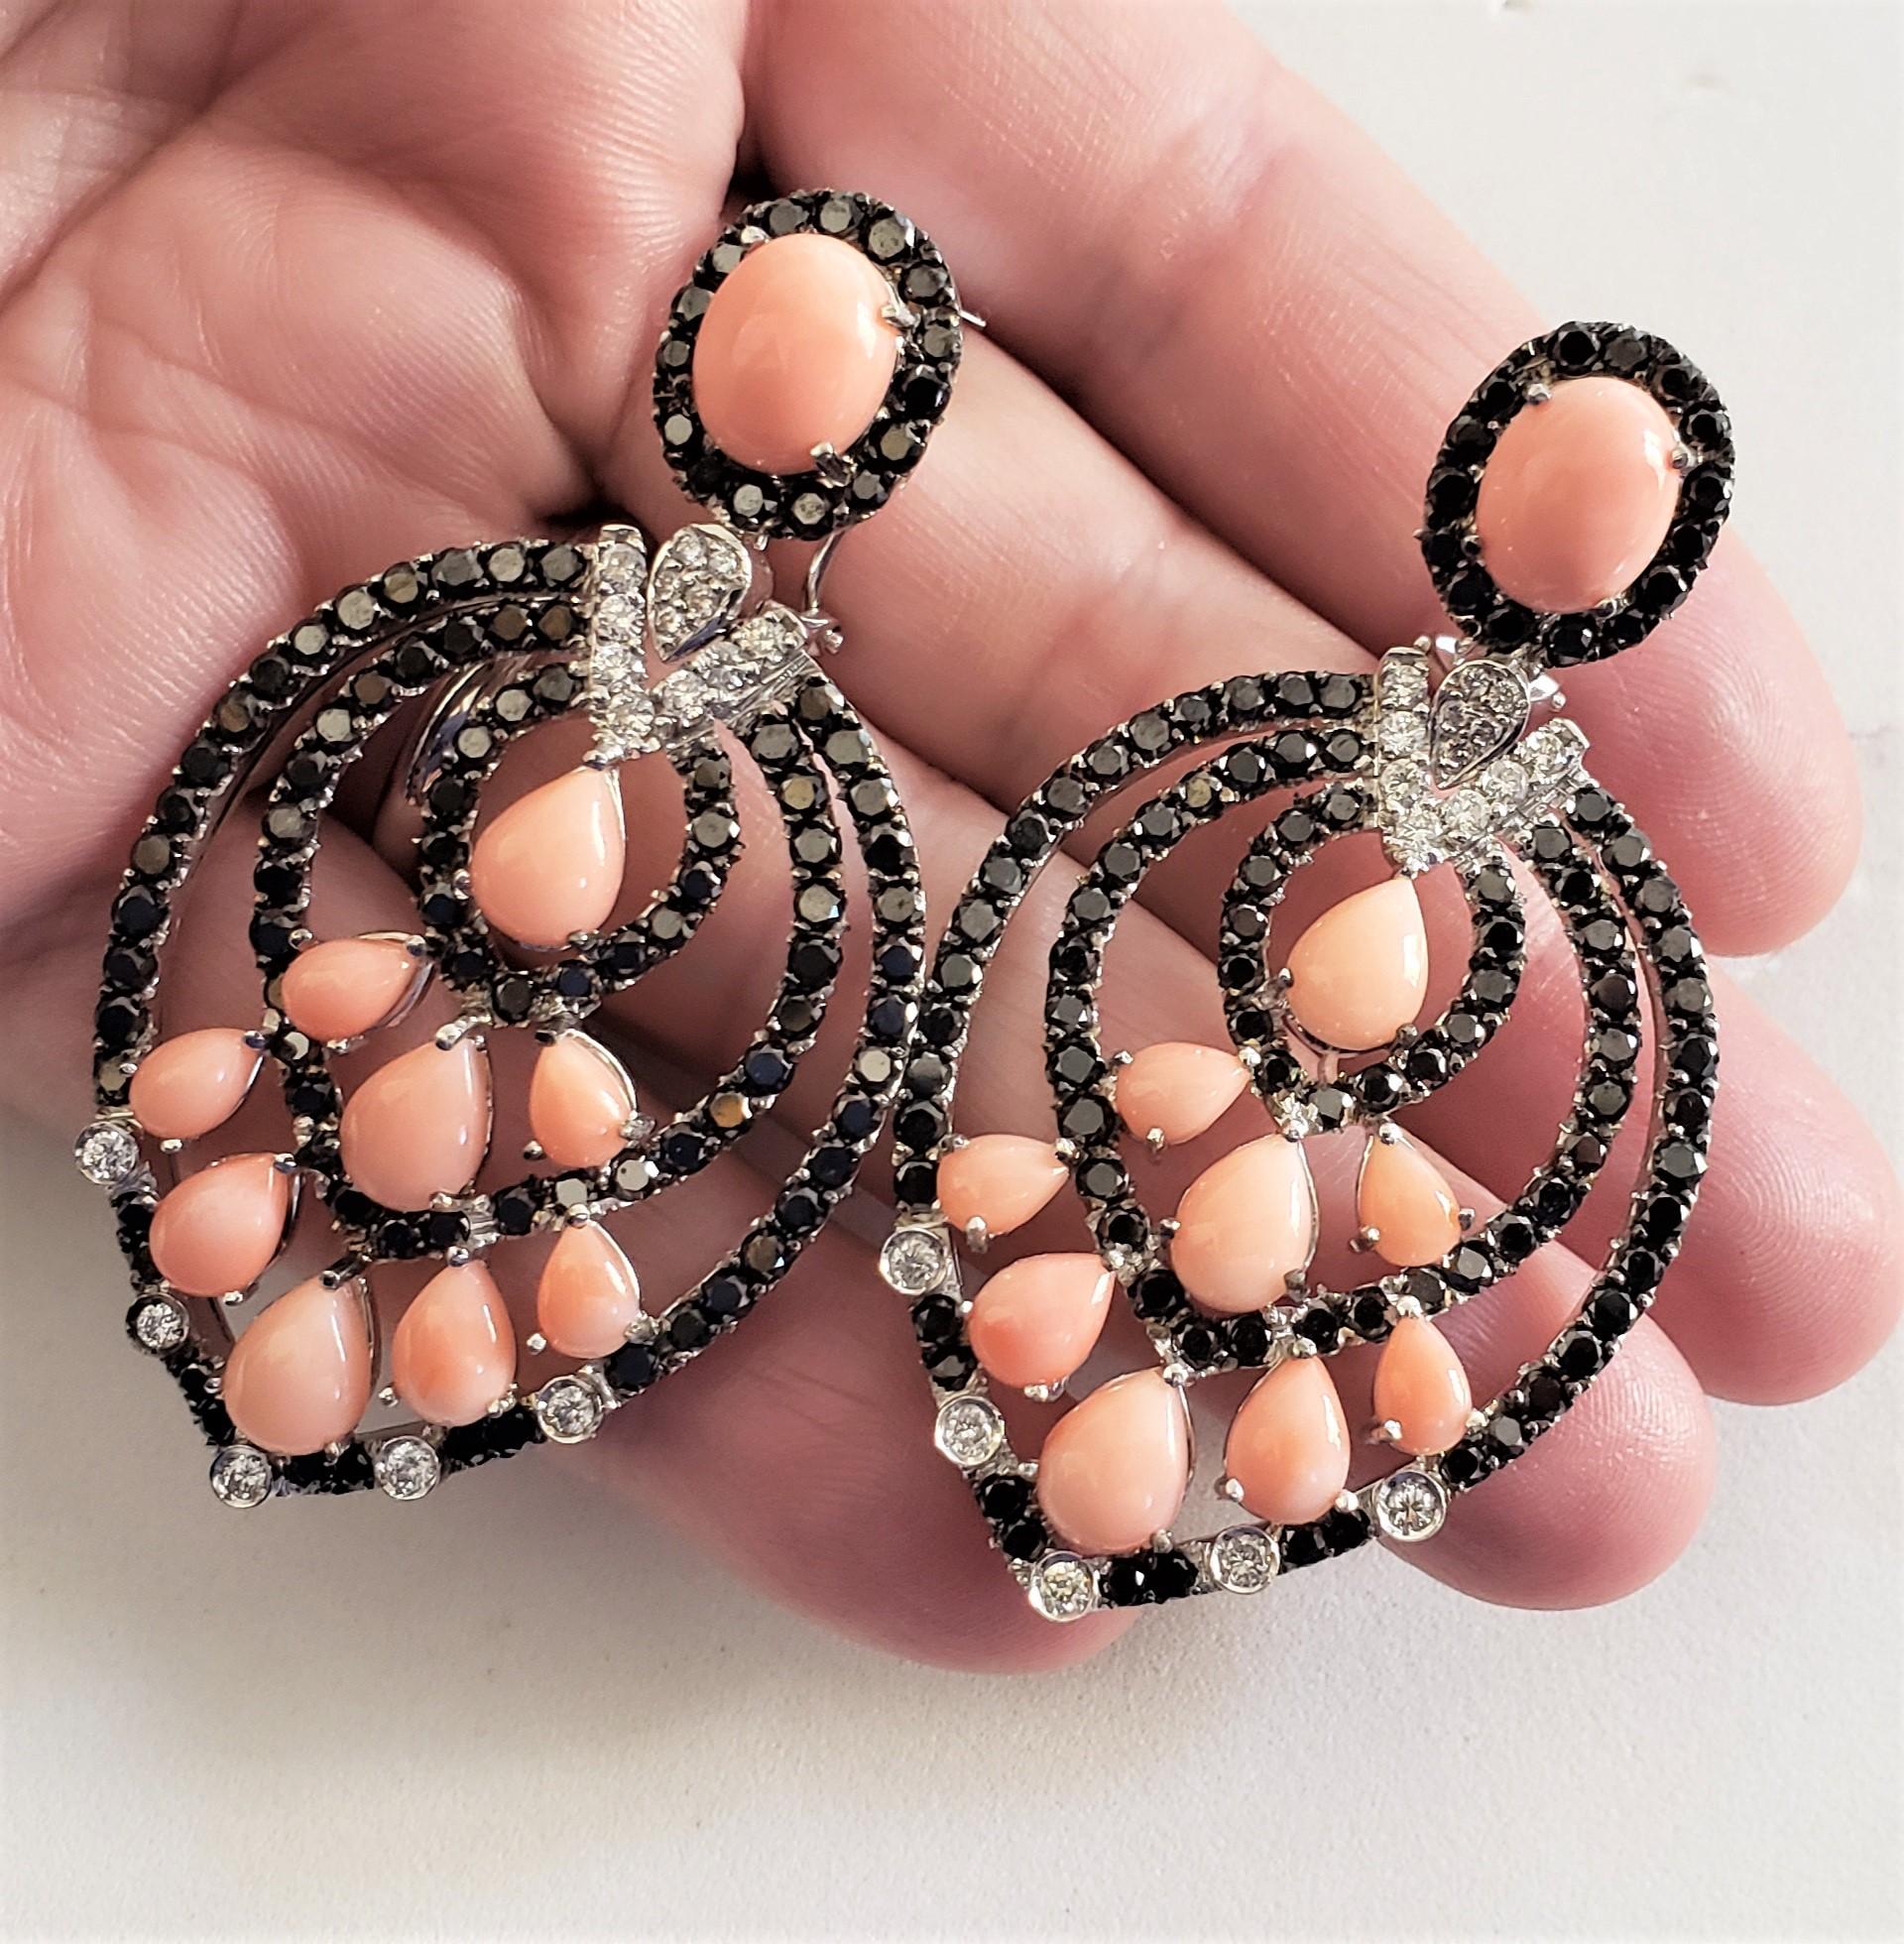 Each chandelier earring encrusted with 98 Natural Black diamonds (natural black diamonds sparkle differently then any other black gem stones) and 12 natural white diamonds (G-H in color, SI1 clarity). Dangling part of each earring set with 9 Pear